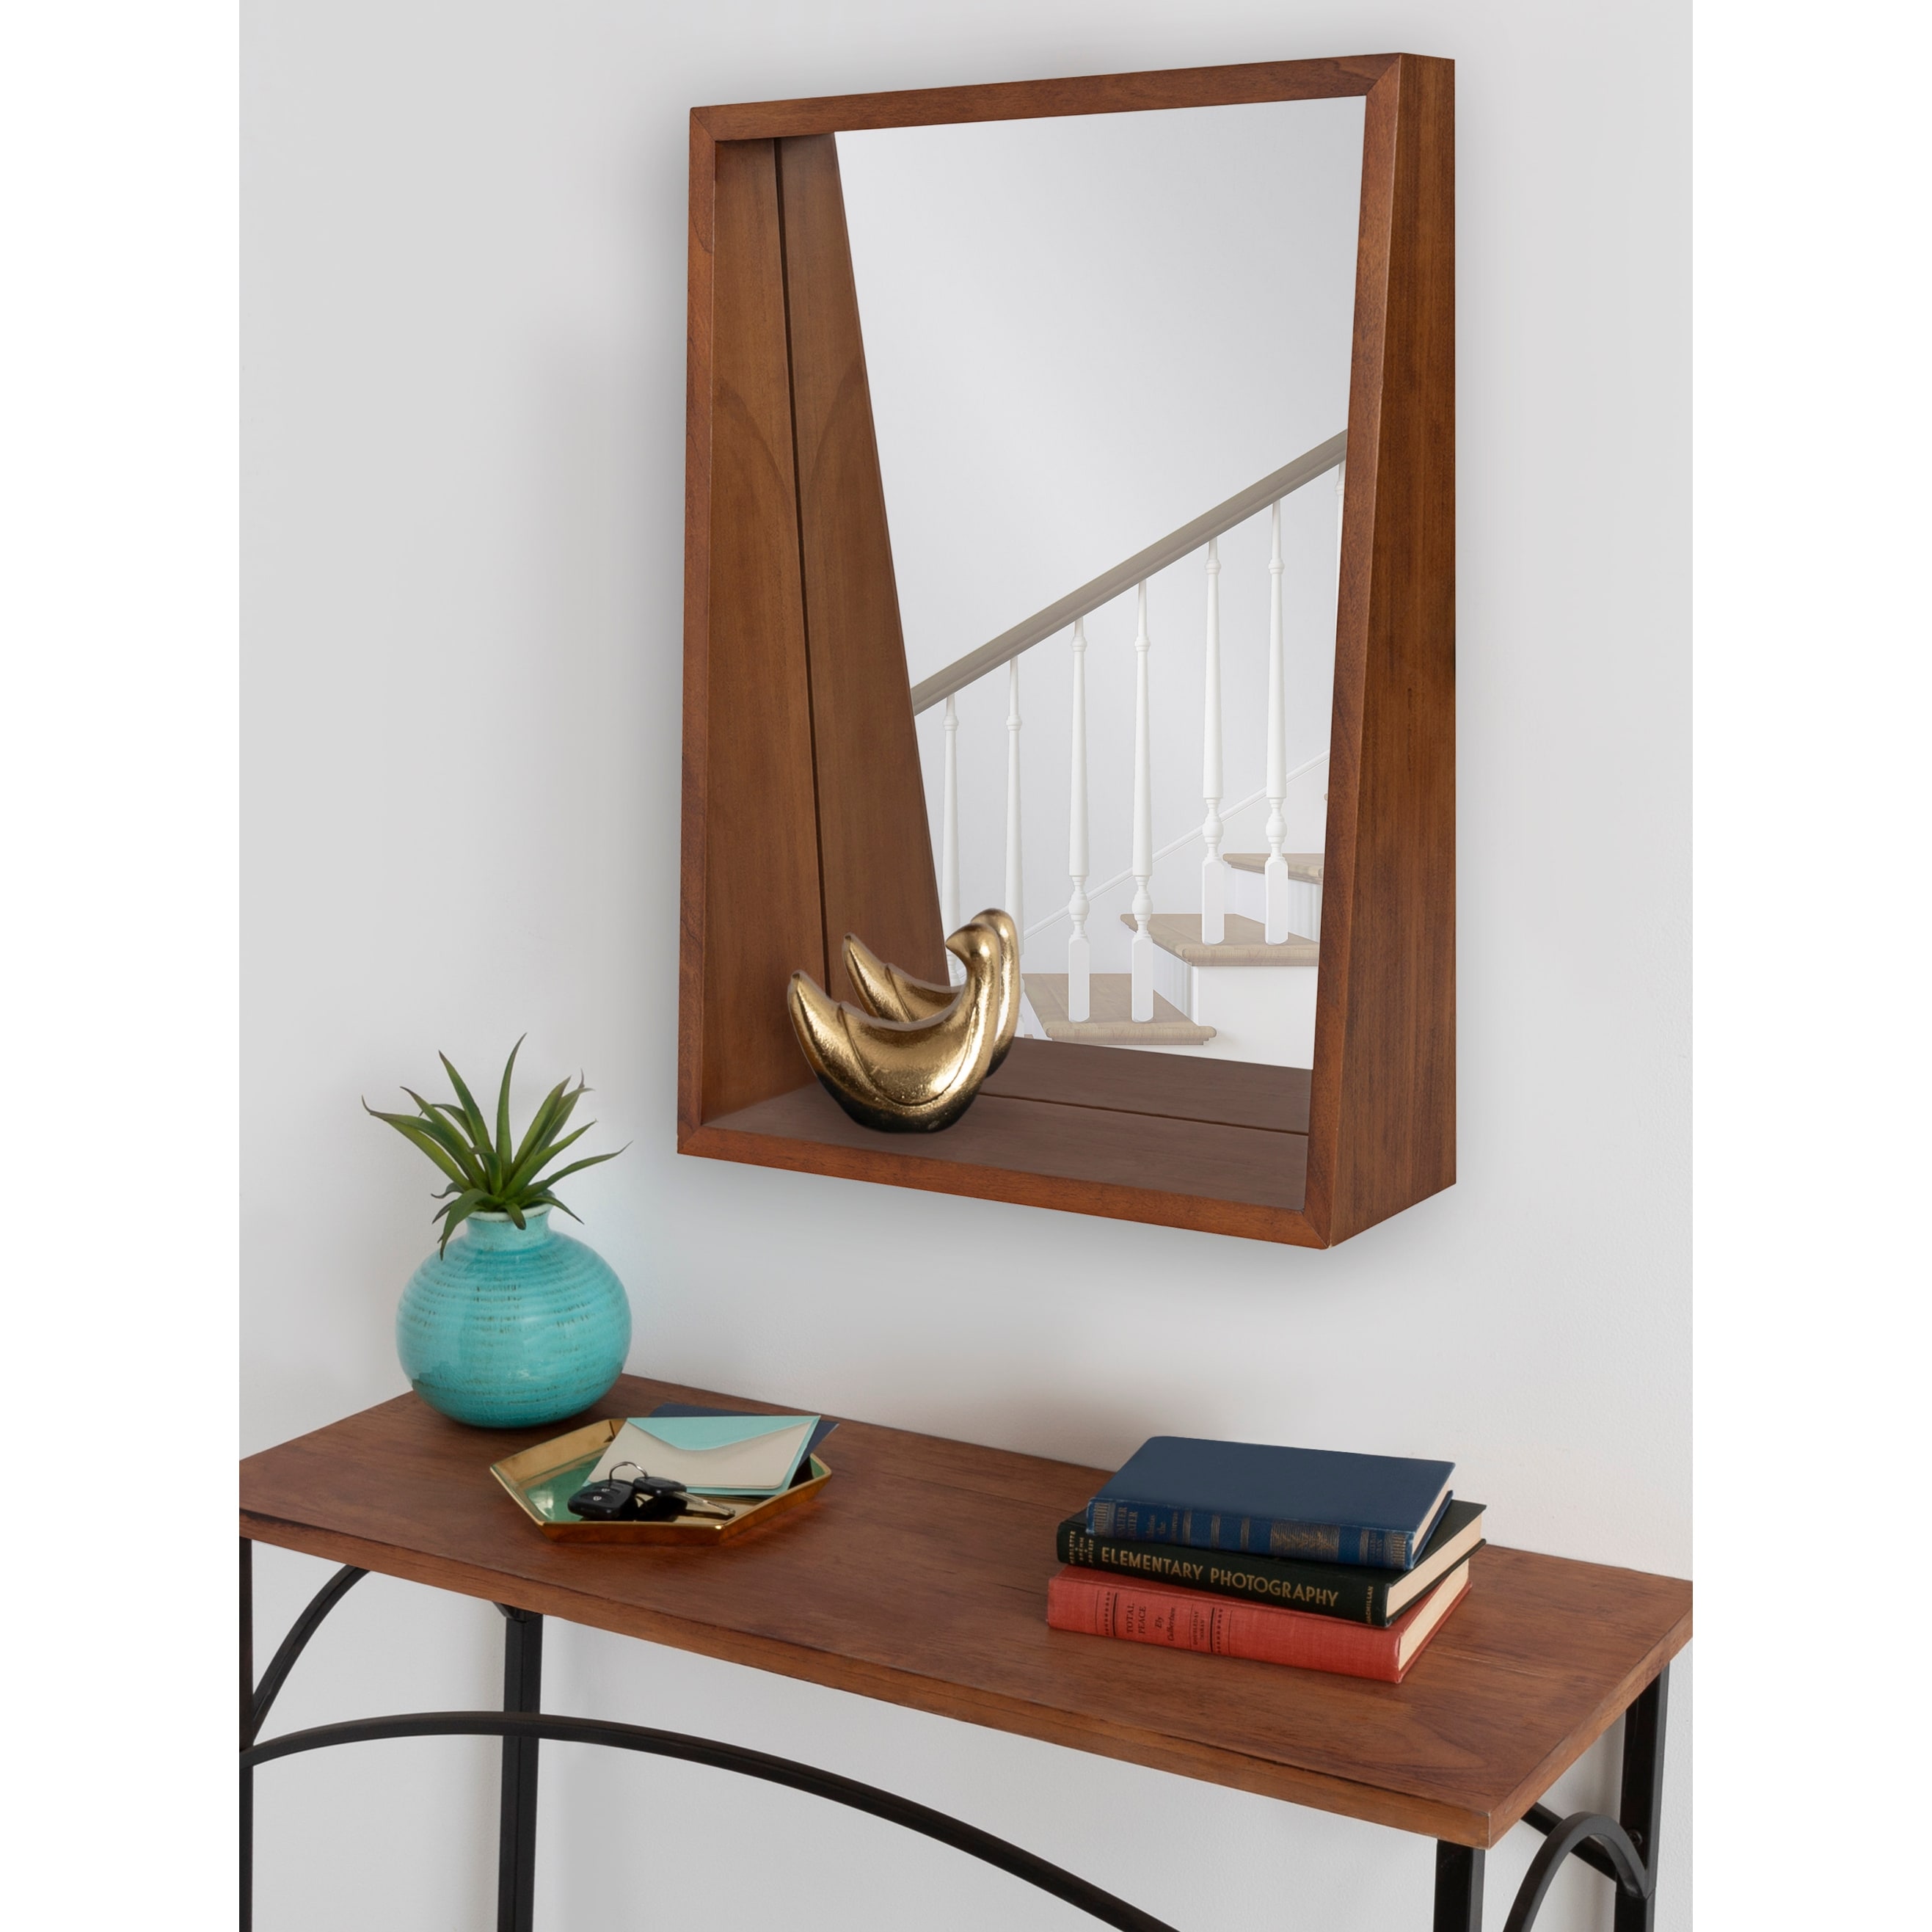 https://ak1.ostkcdn.com/images/products/is/images/direct/f369210f499af2505c424b906069cd323736b778/Kate-and-Laurel-Hutton-Wood-Framed-Wall-Mirror-with-Shelf.jpg